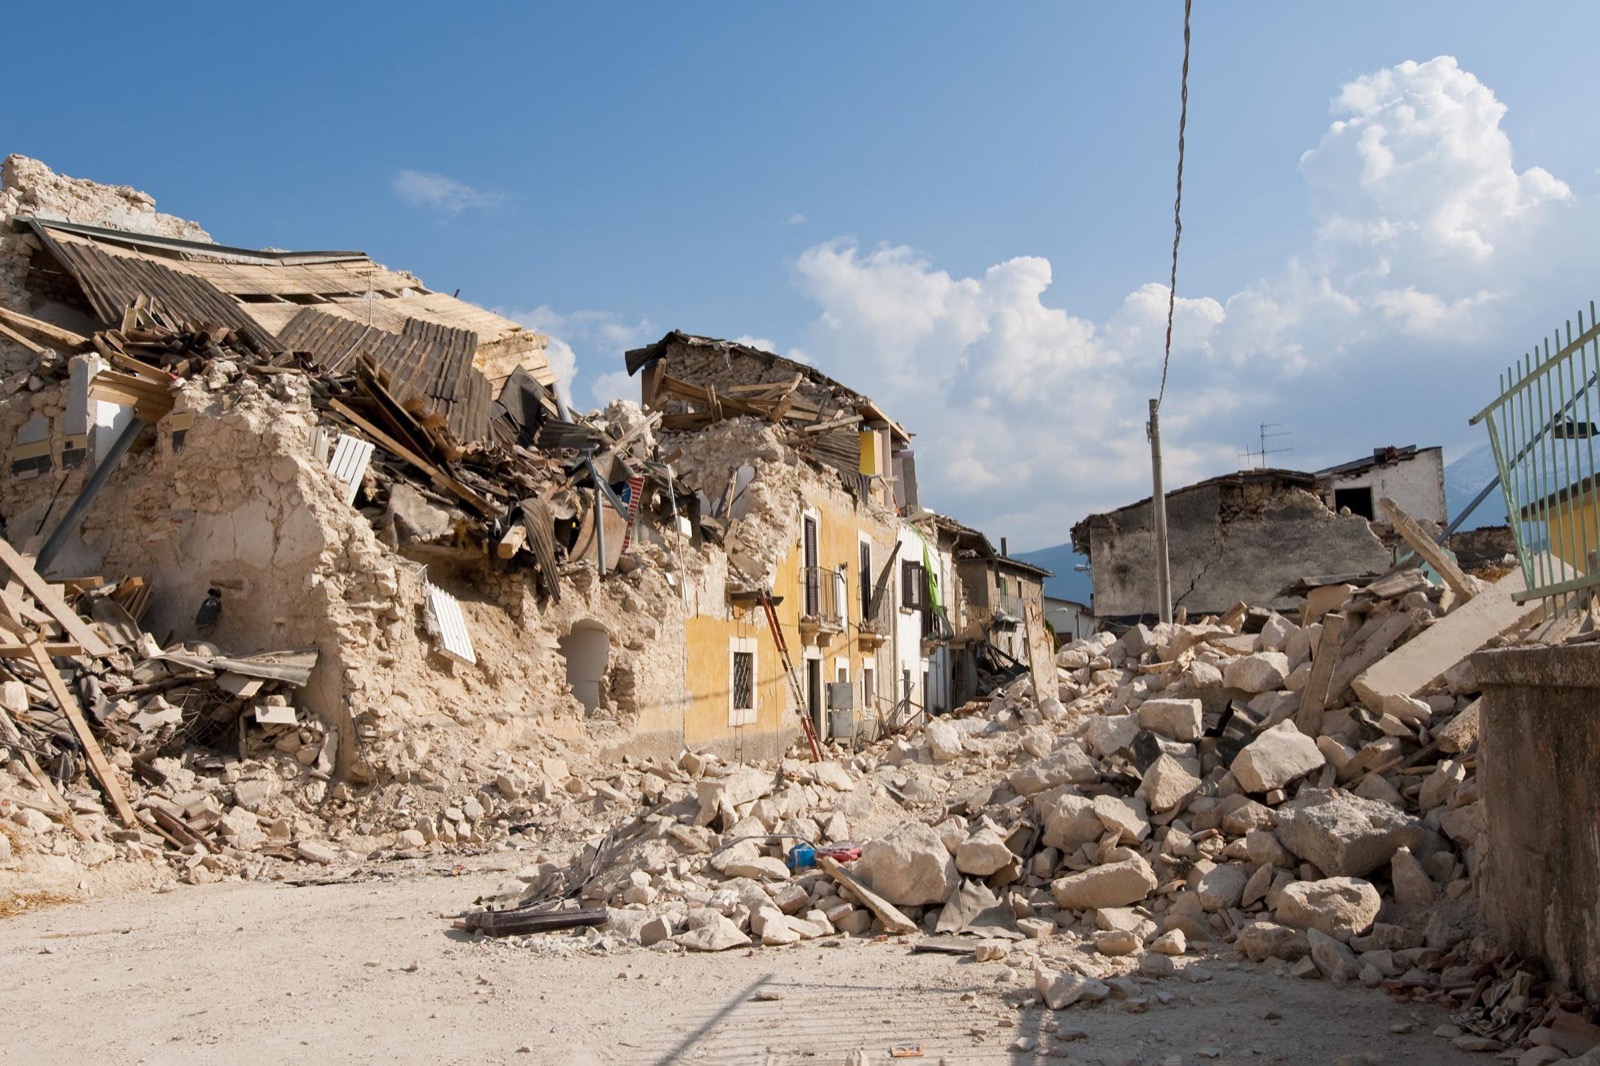 Can You Make It Through the Geography Version of “Two Truths and a Lie”? Earthquake Rubble